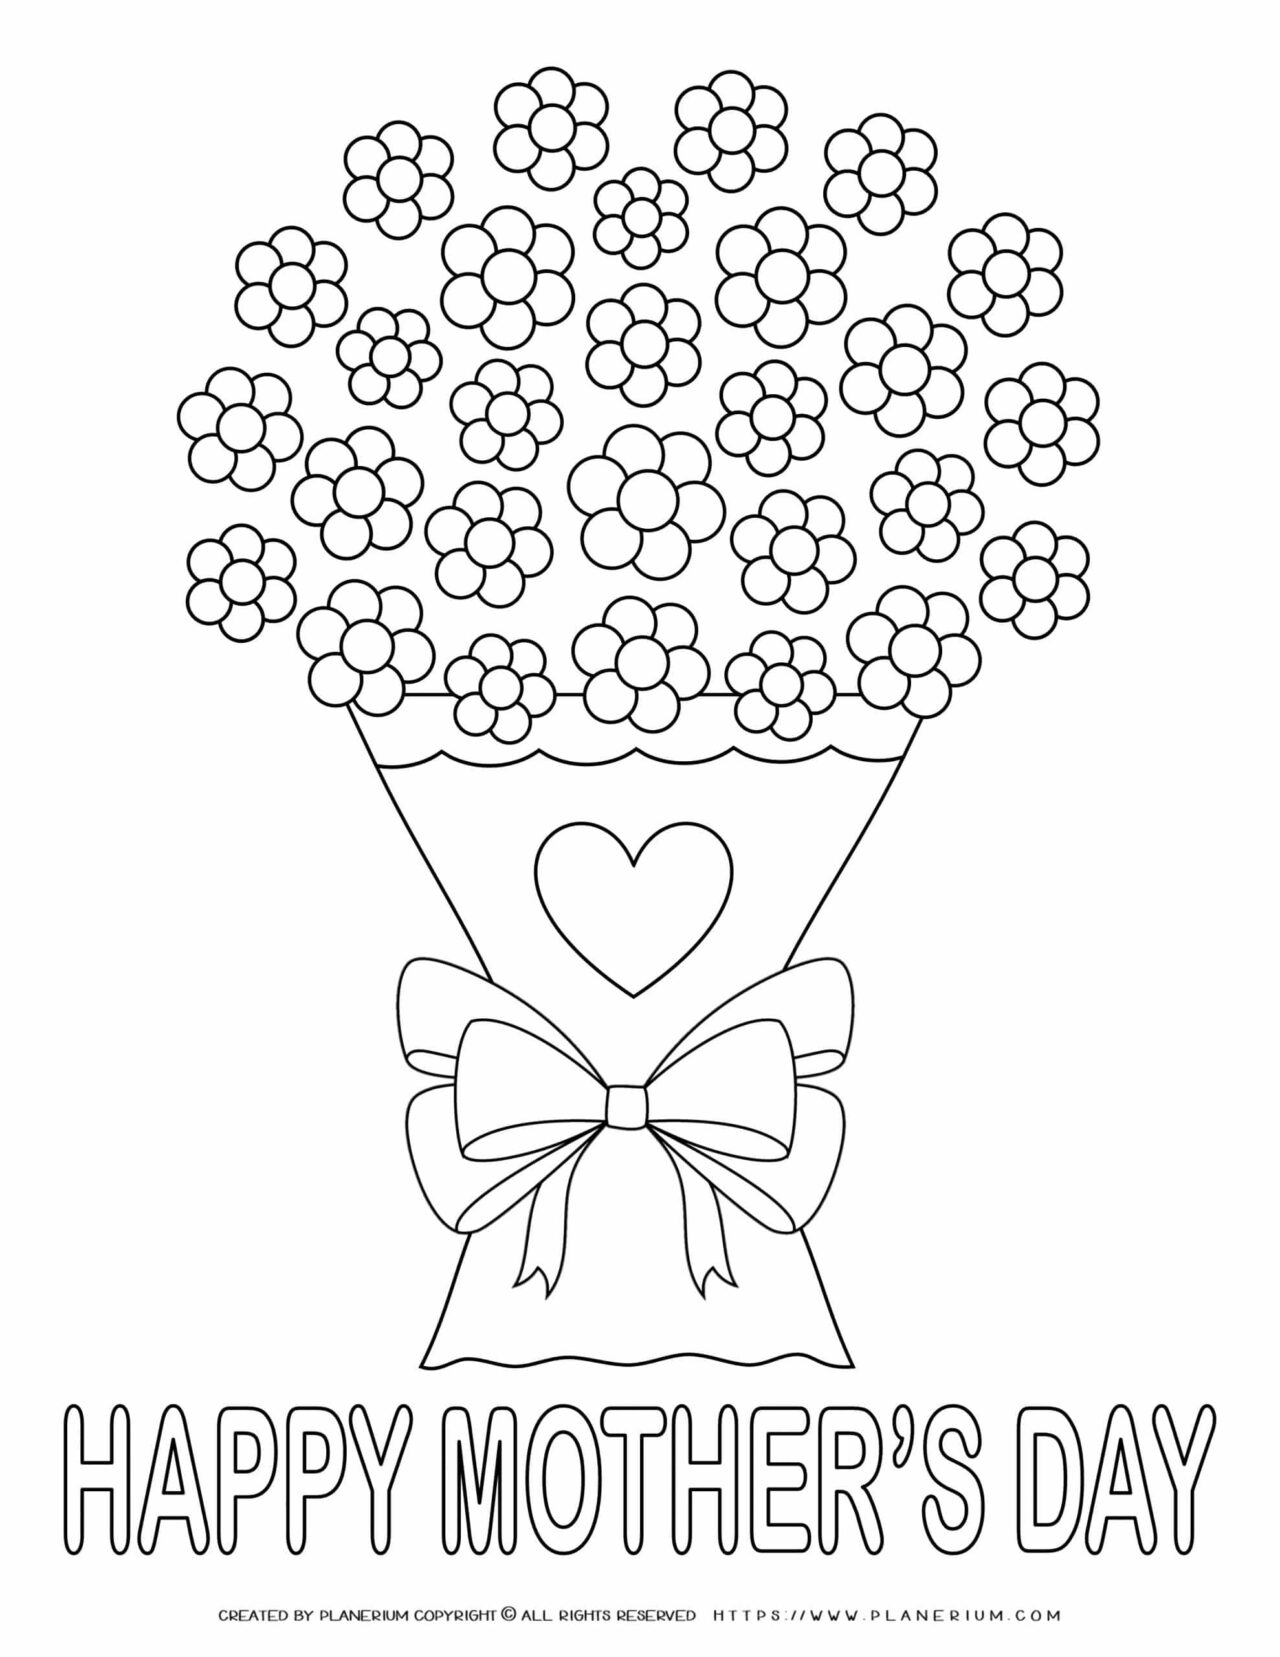 Mother's Day - Coloring Page - Flowers for Mom